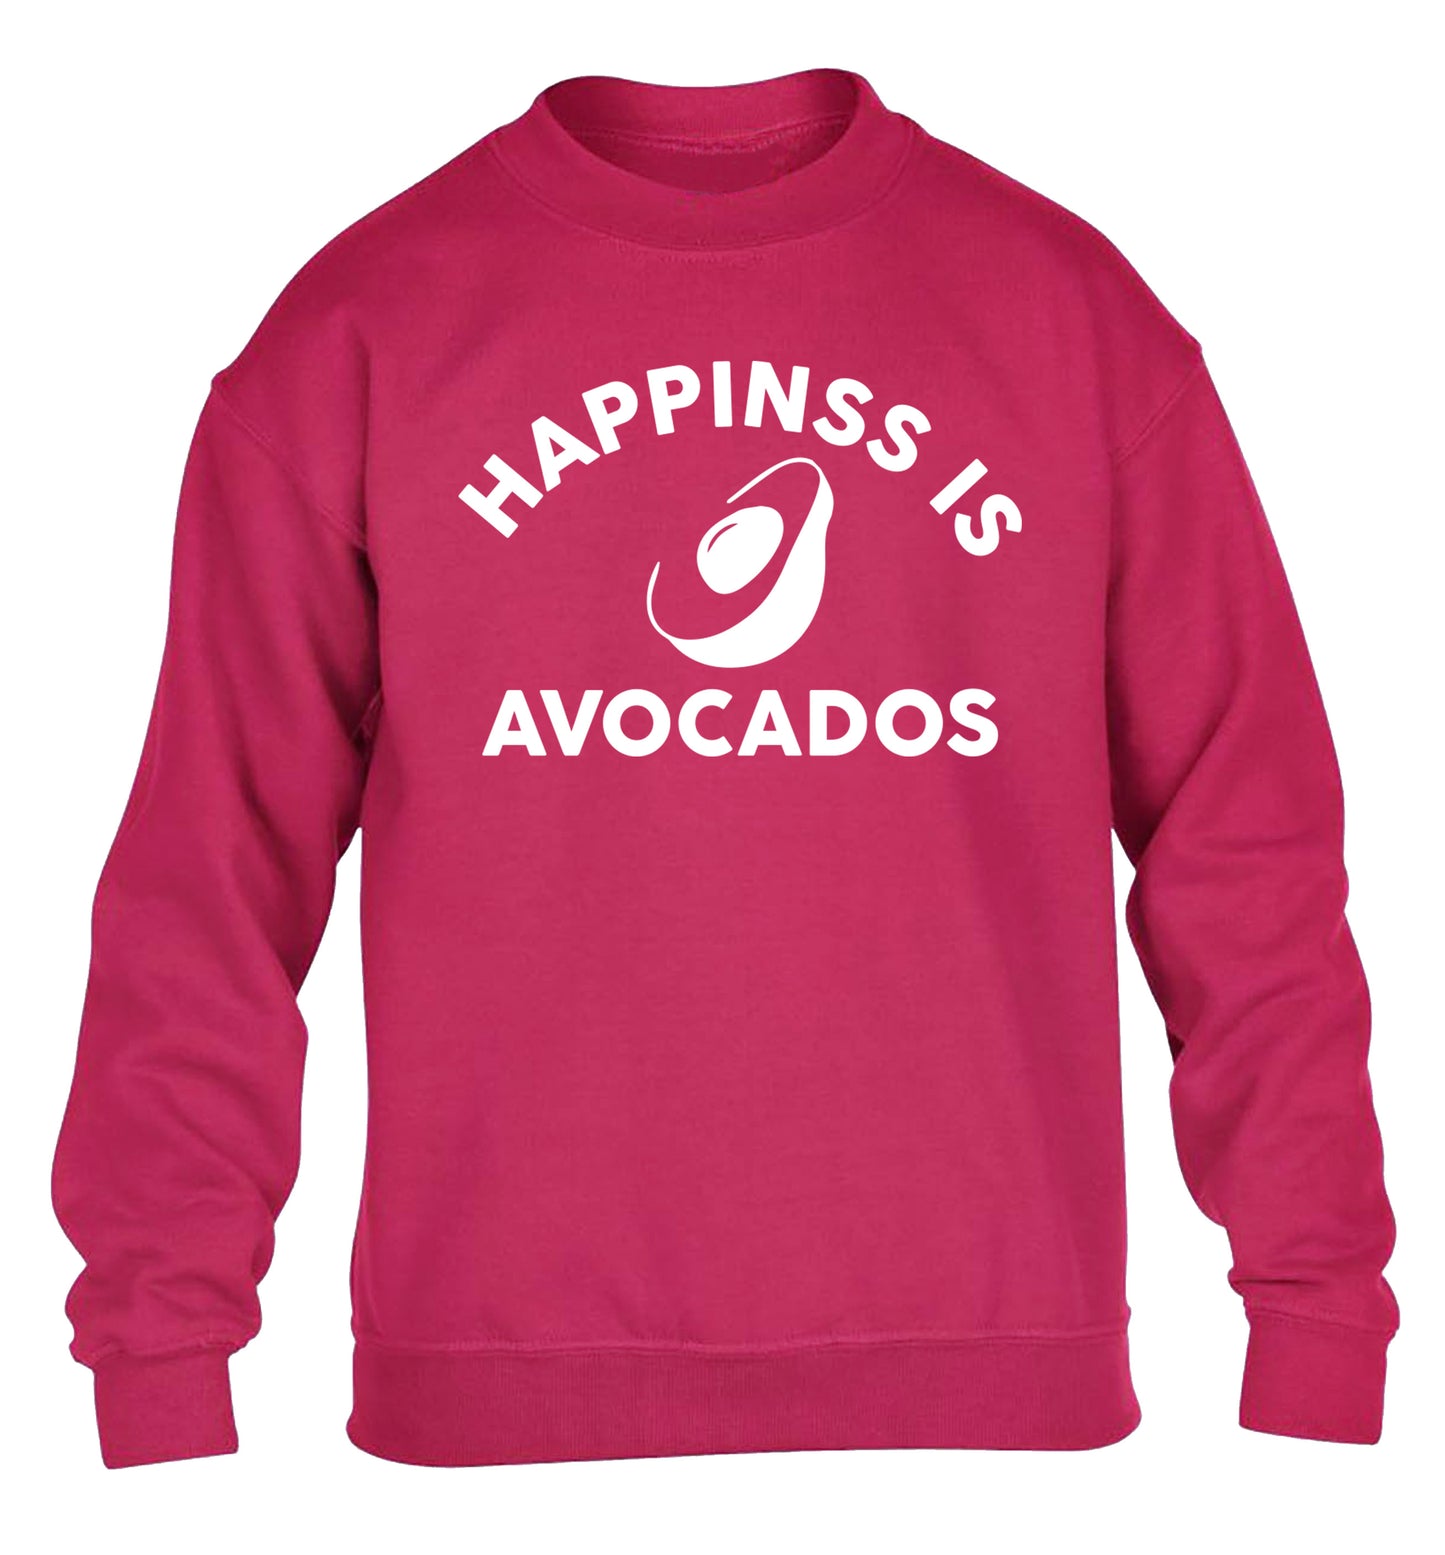 Happiness is avocados children's pink sweater 12-14 Years